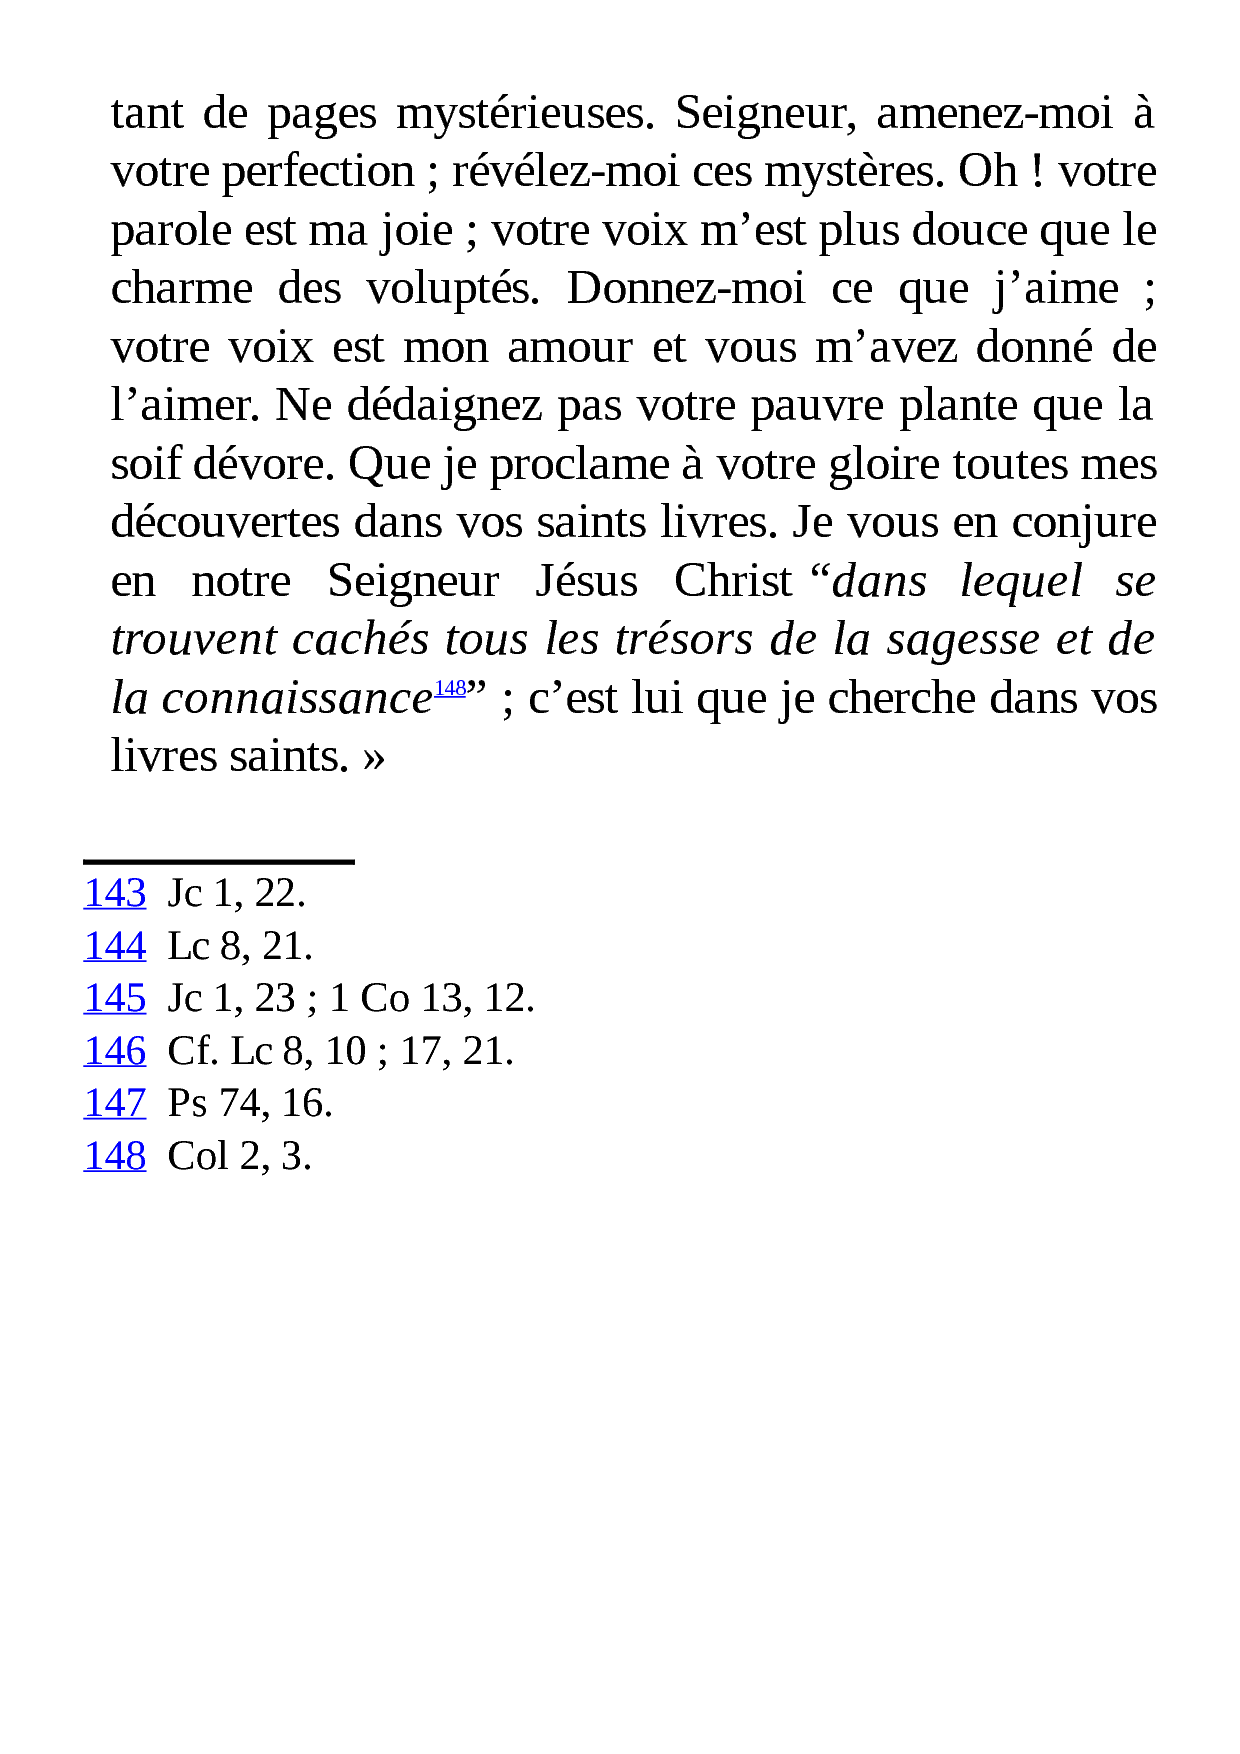 Page 71